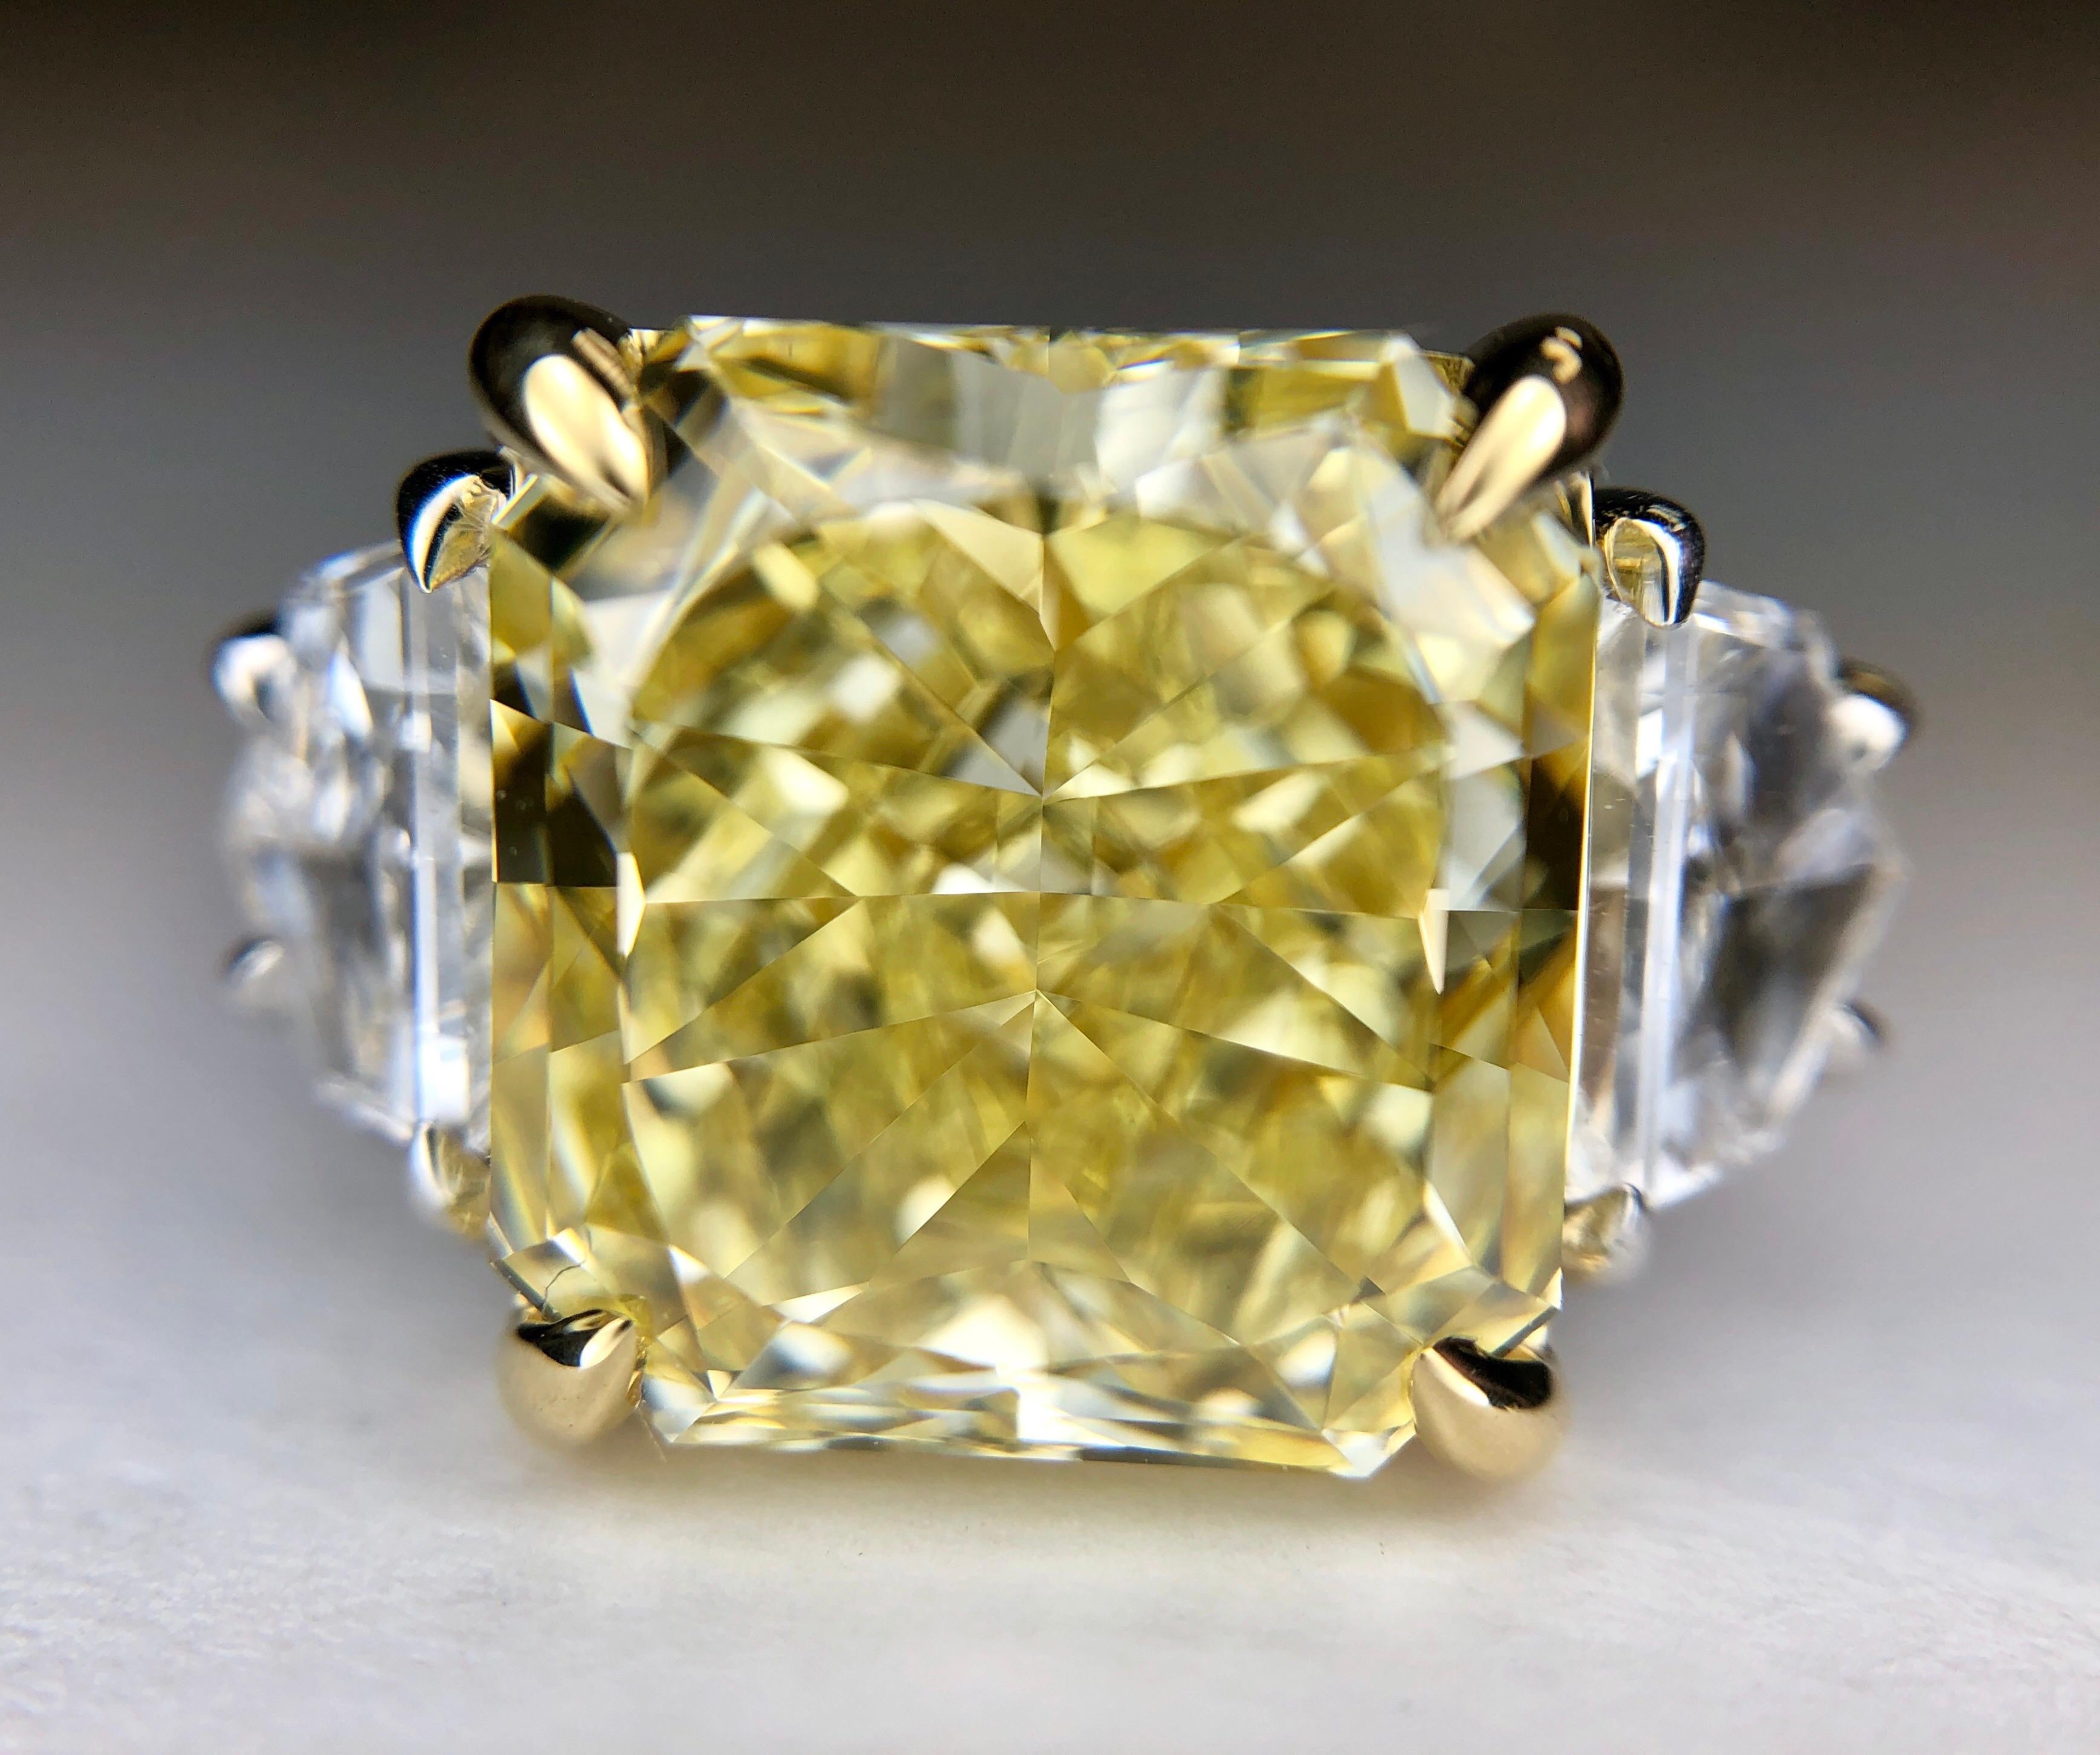 6.84 Carat Natural Fancy Intense Internally Flawless Diamond in a Custom Platinum Ring set with two Cadillac Cut Natural Diamonds Weighing 0.78ct Total. Stunning, classic design. 

Center Diamond: 6.84ct Natural, Fancy Intense Yellow, Even Color.